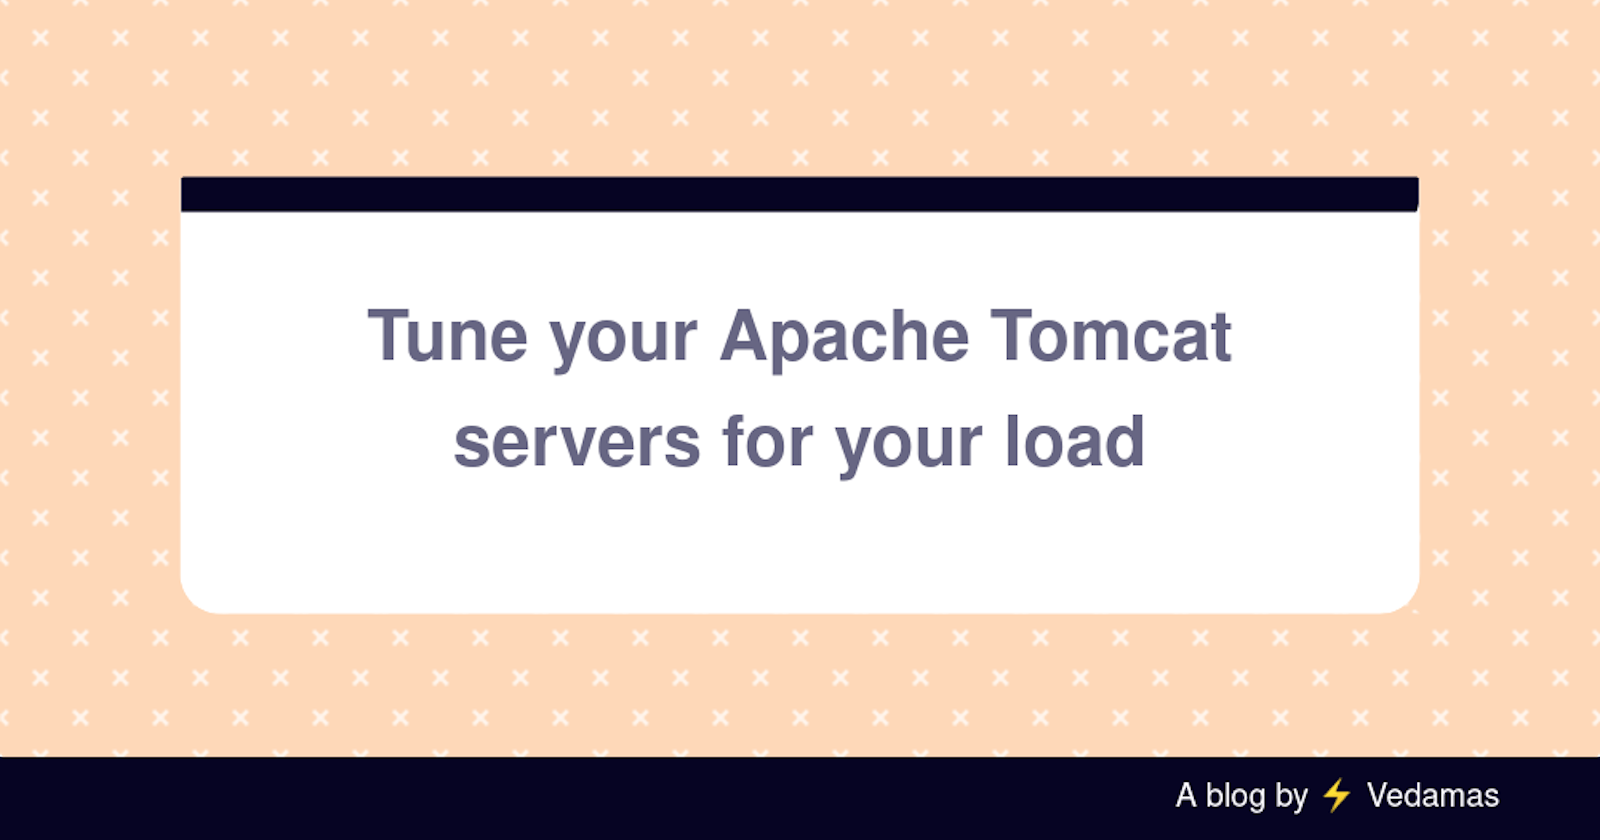 Tune your Apache Tomcat servers for your load